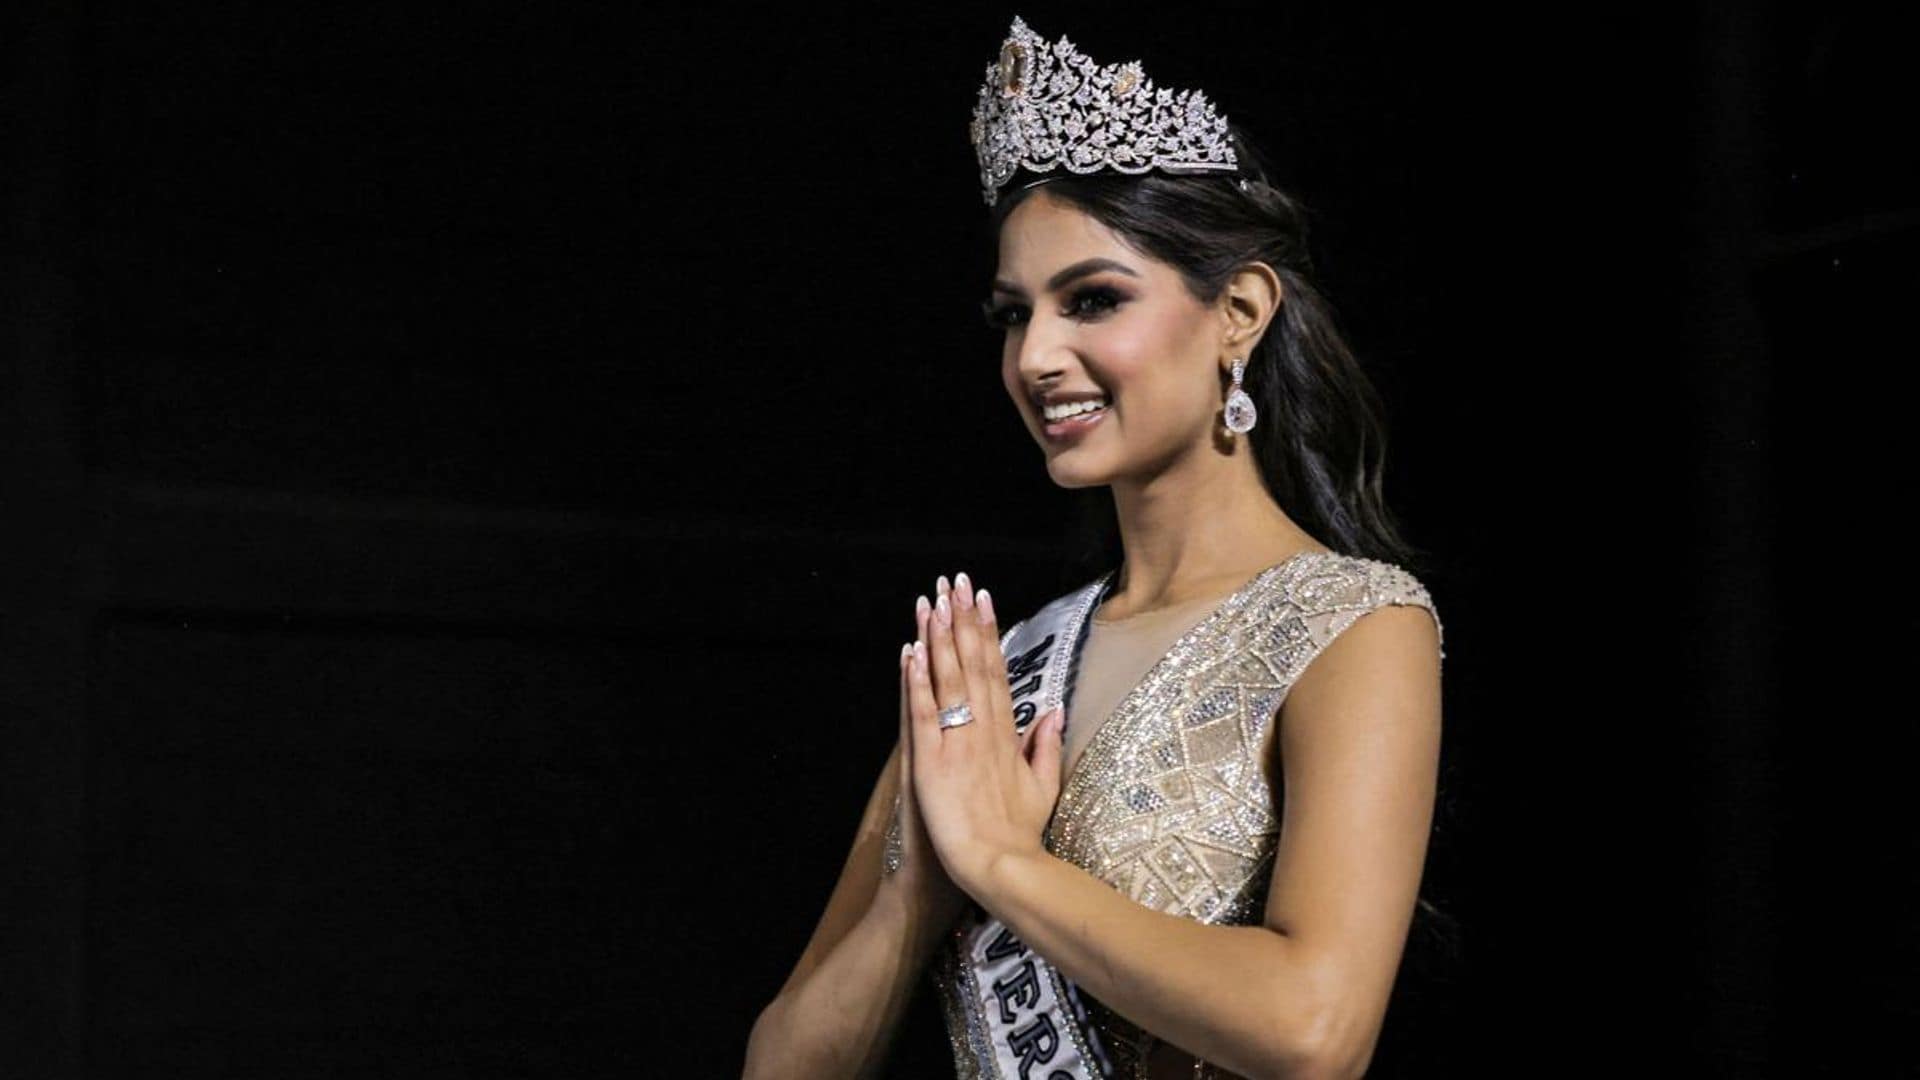 From a cash prize to a luxury apartment: What are the benefits of winning Miss Universe?